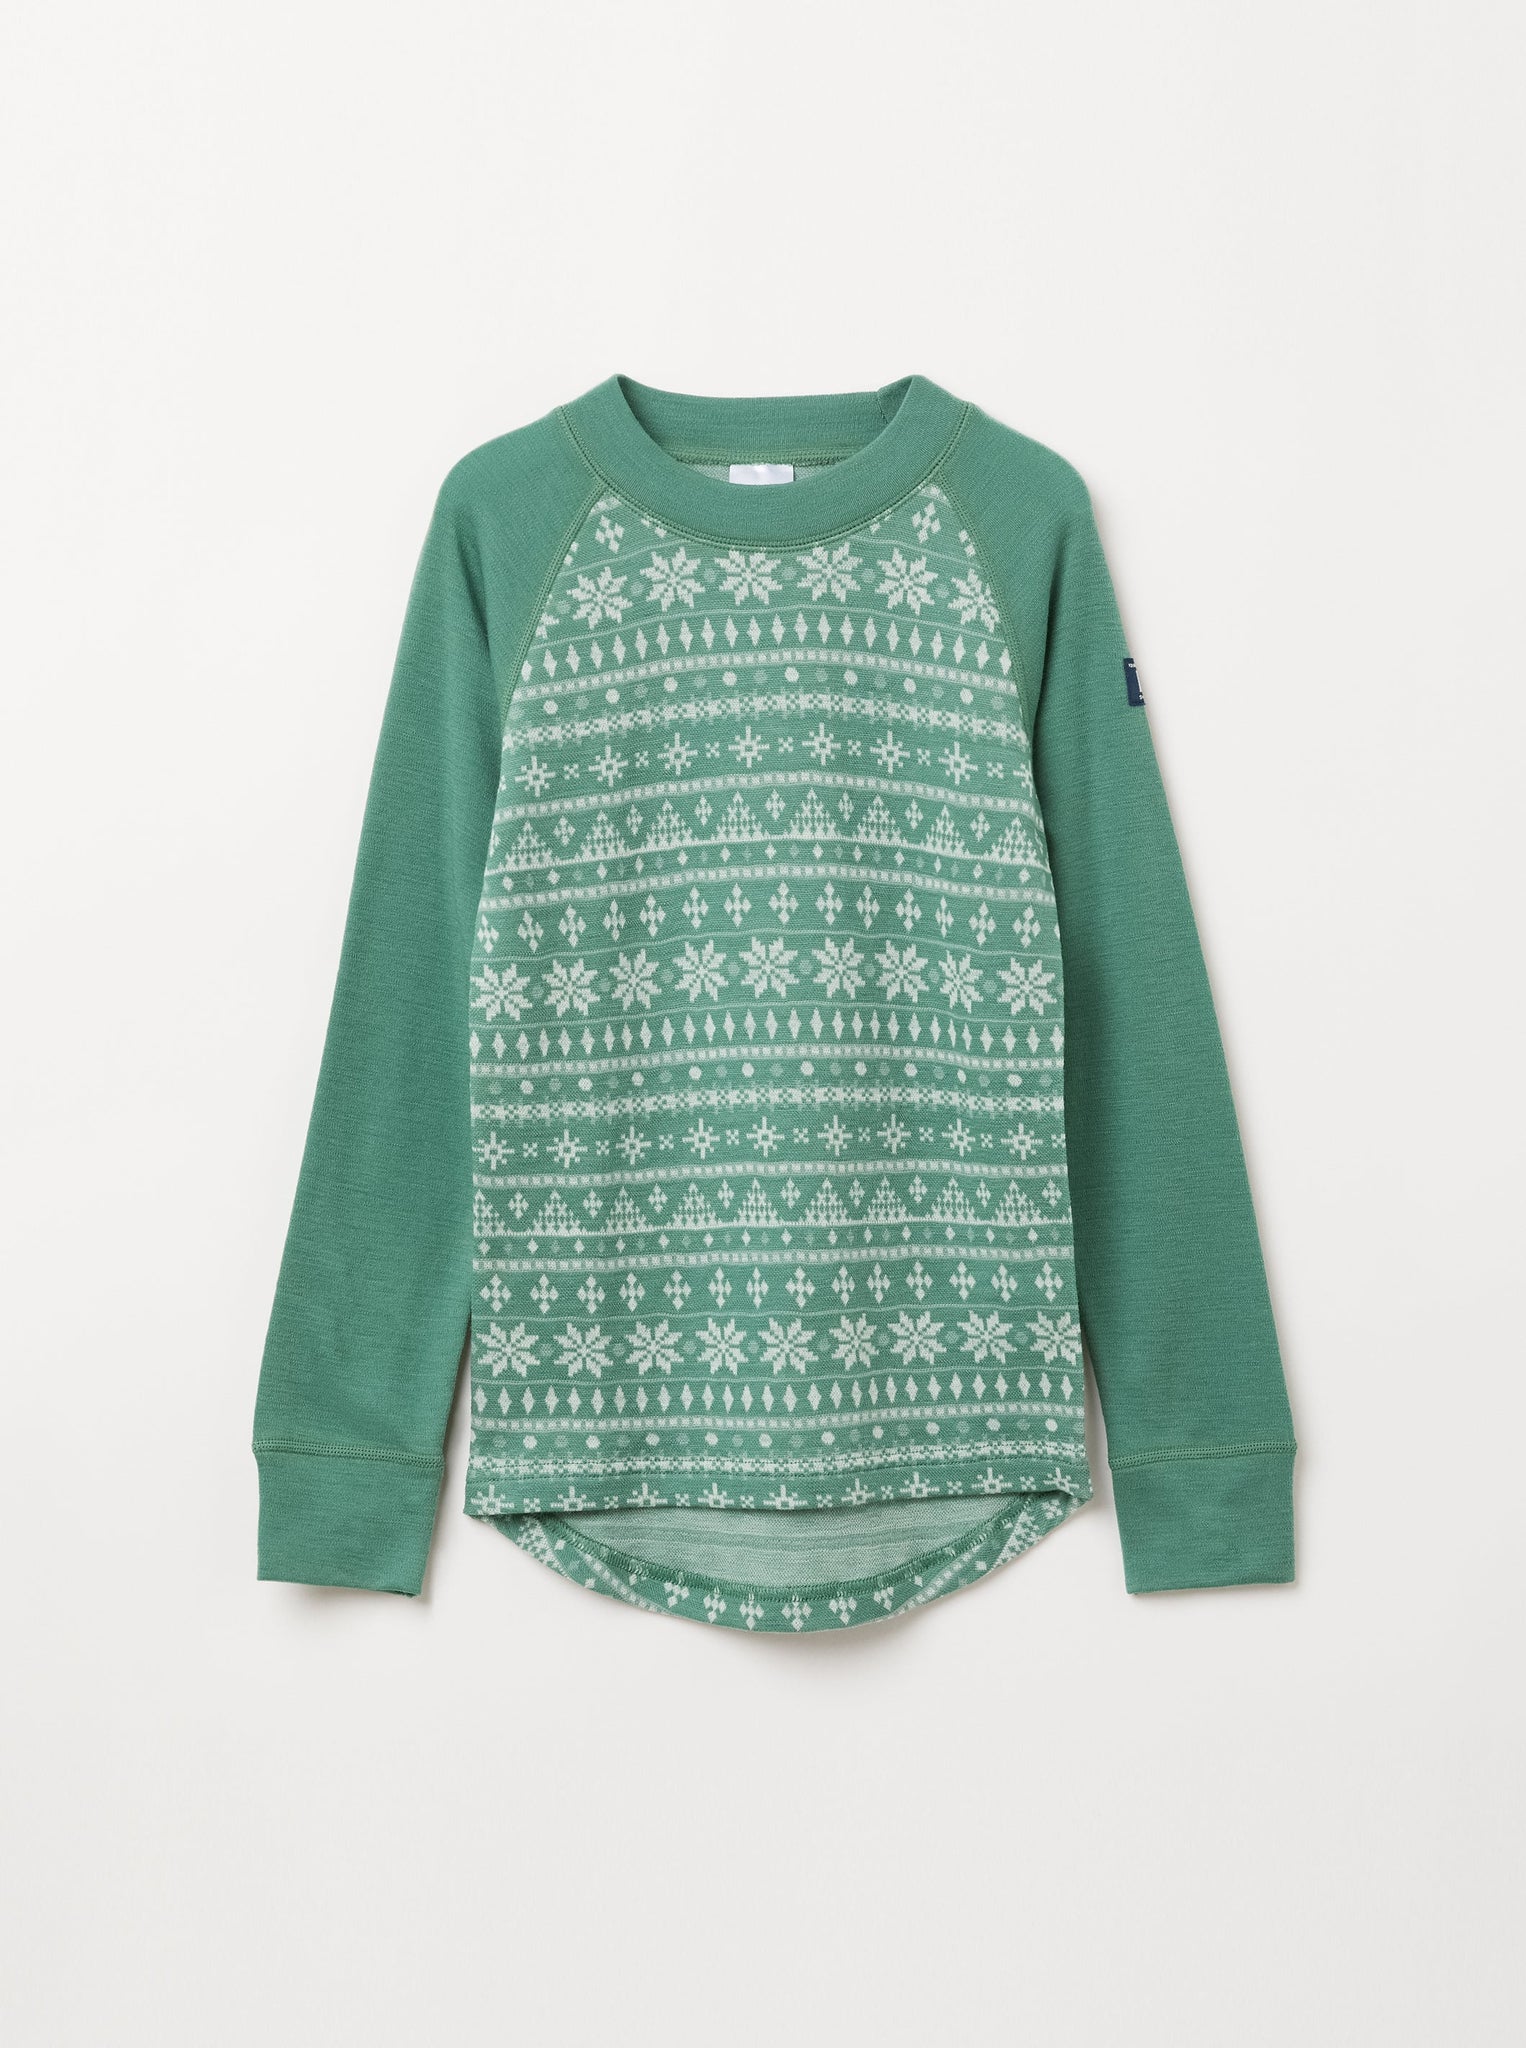 Merino Wool Green Thermal Kids Top from the Polarn O. Pyret kidswear collection. Quality kids clothing made to last.